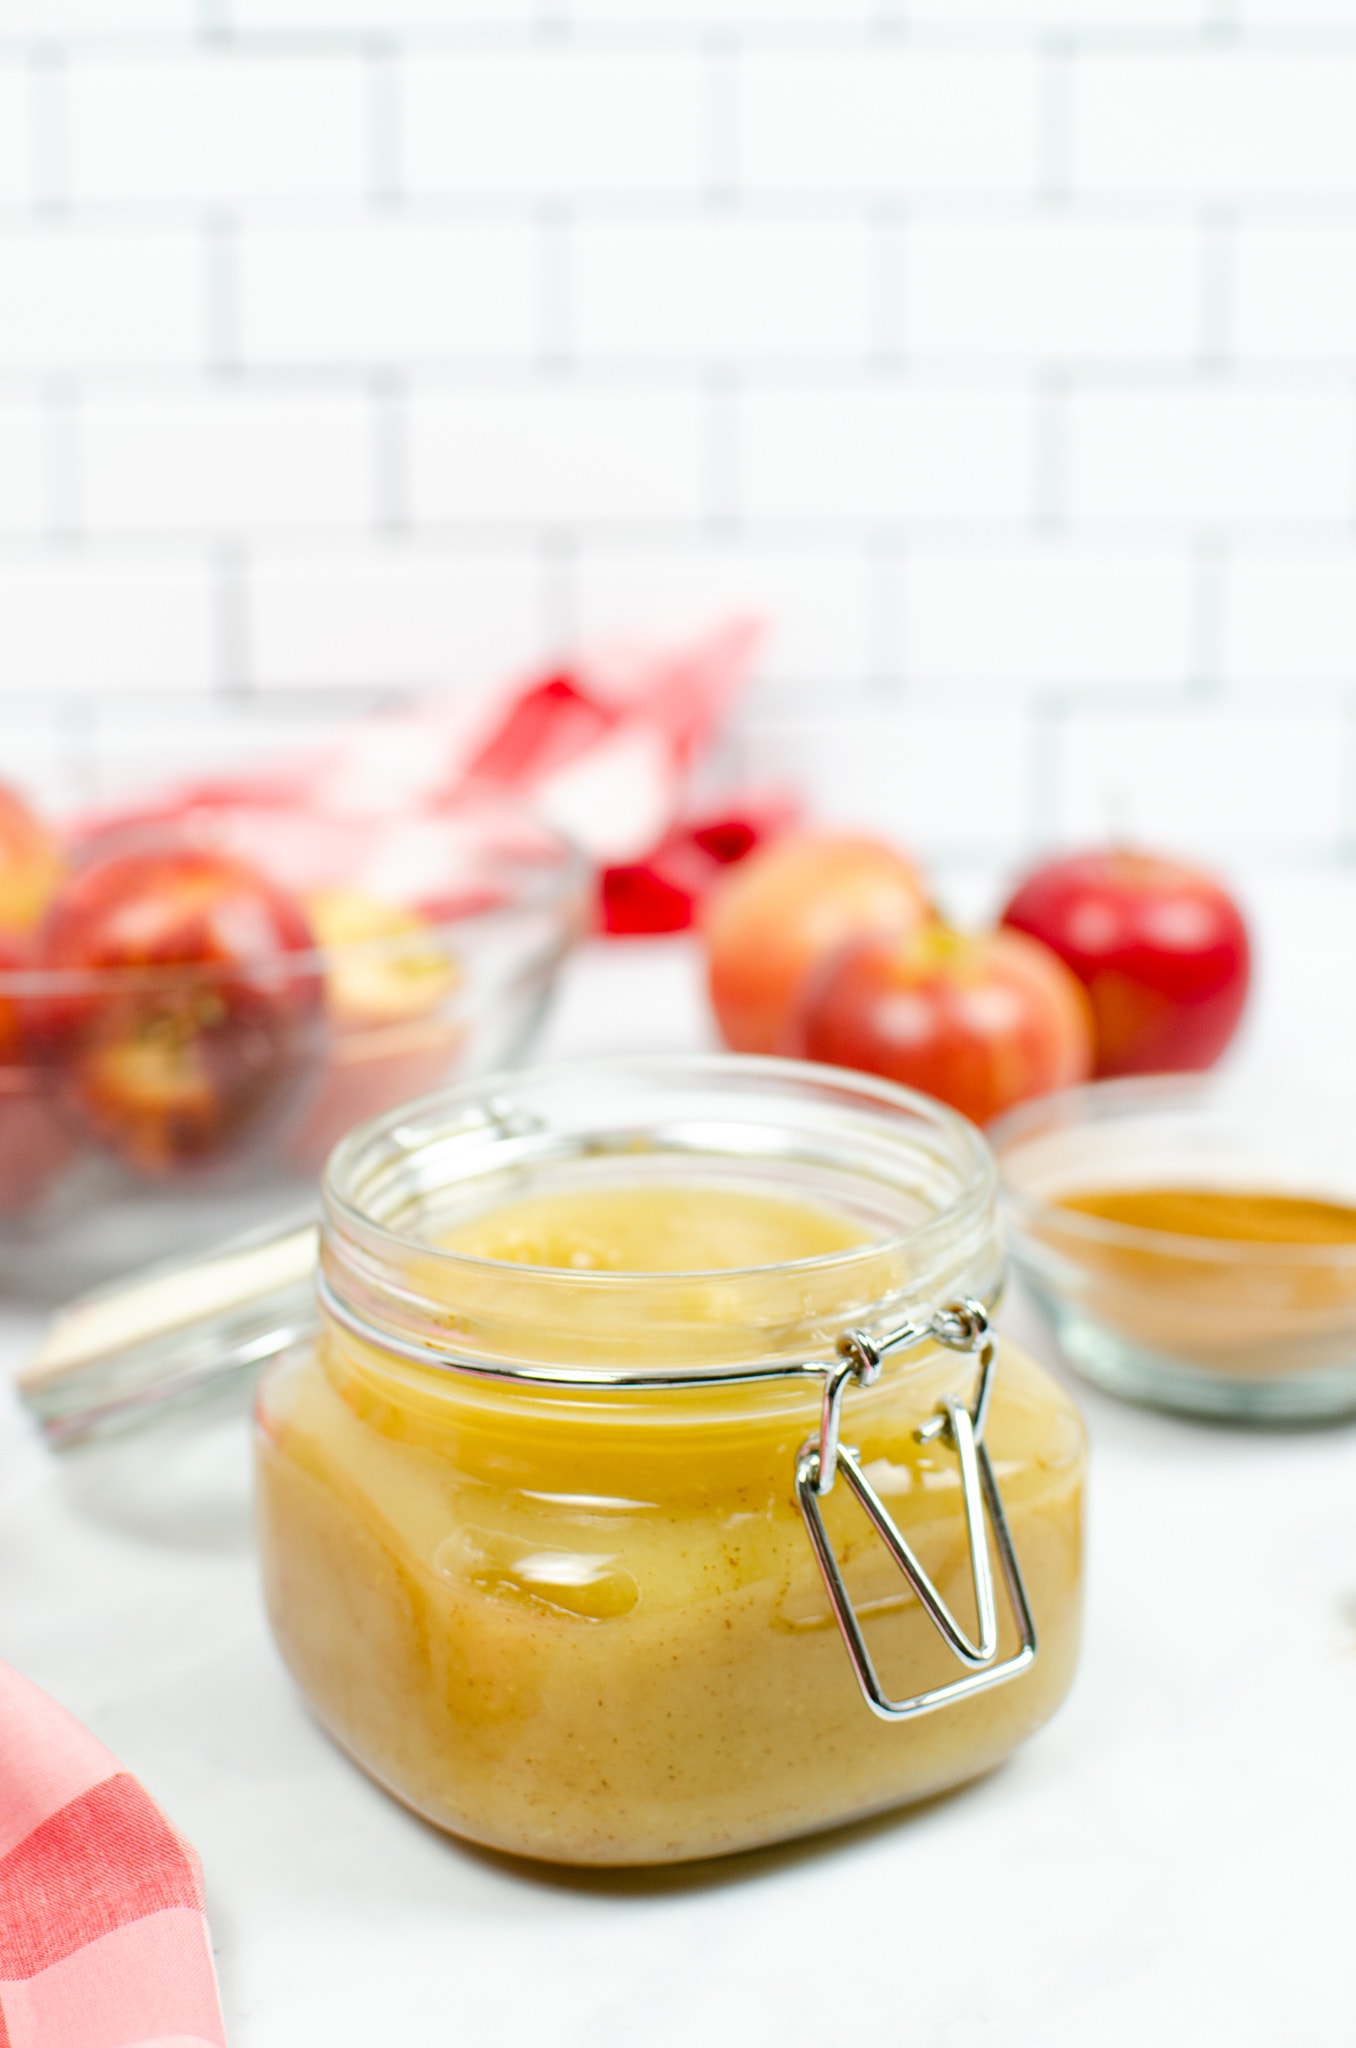 image of applesauce in a jar on a table